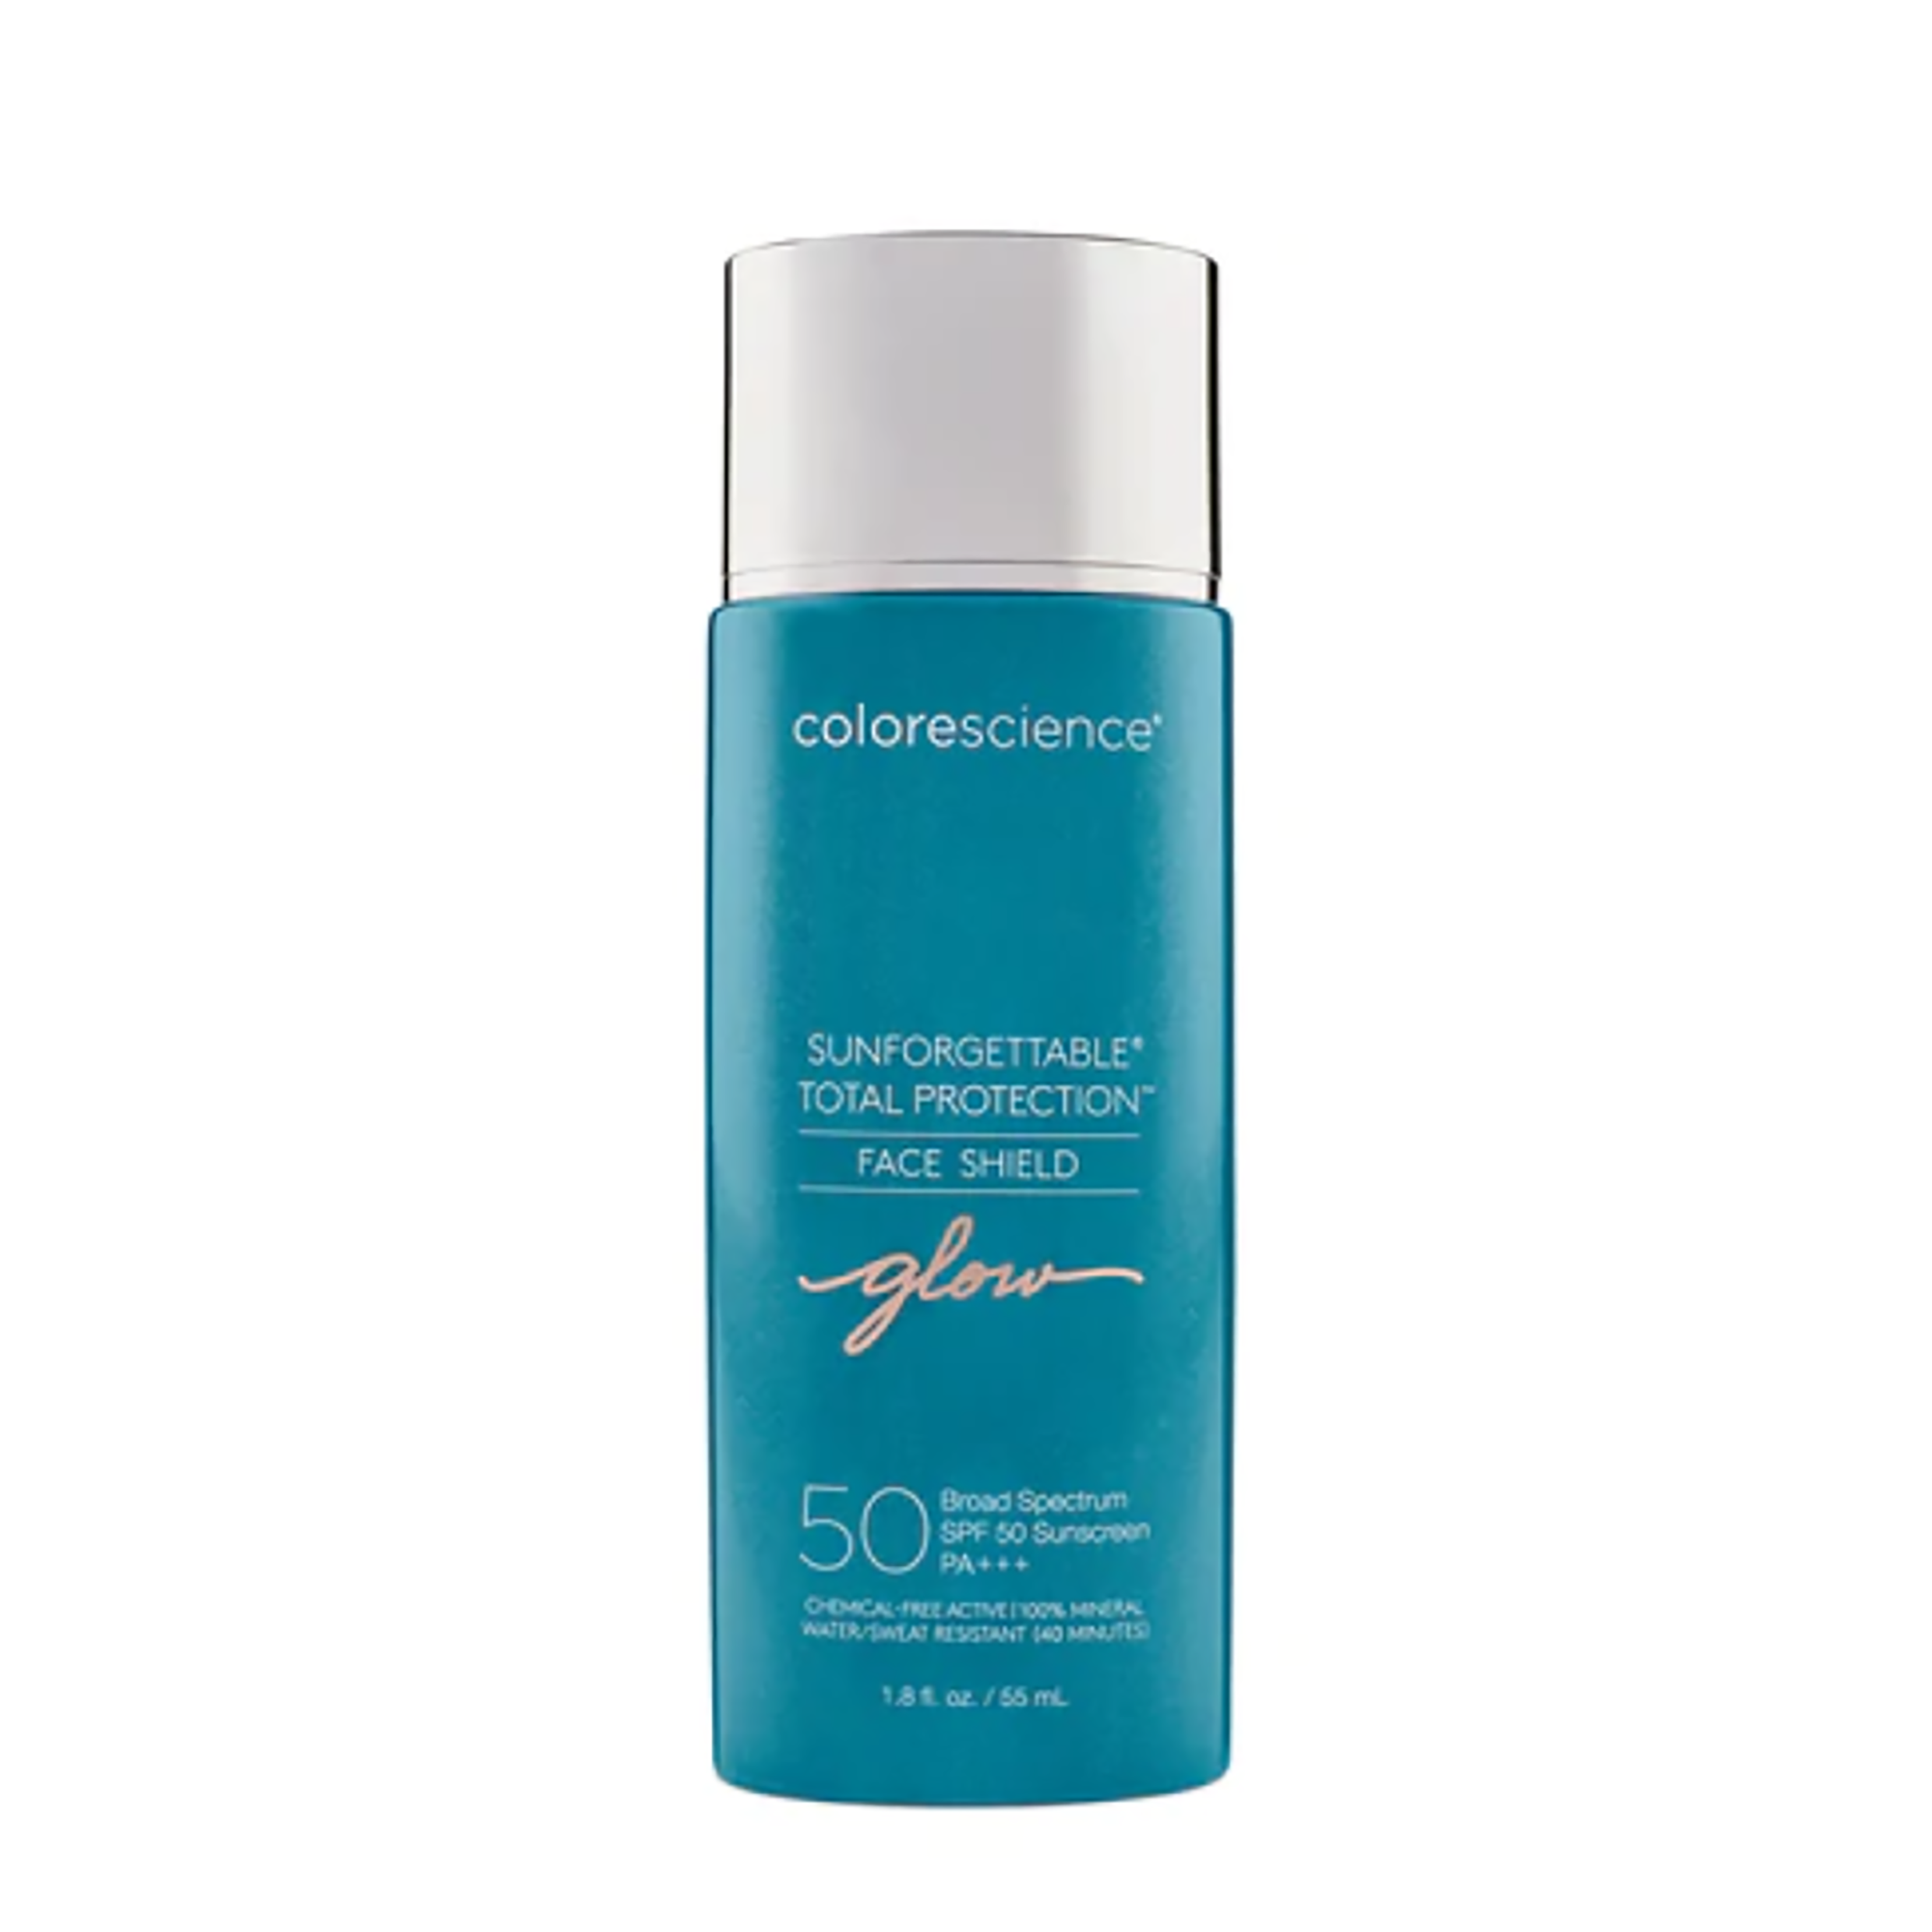 Colorescience Sunforgettable Total Protection Face Shield SPF 50 / GLOW